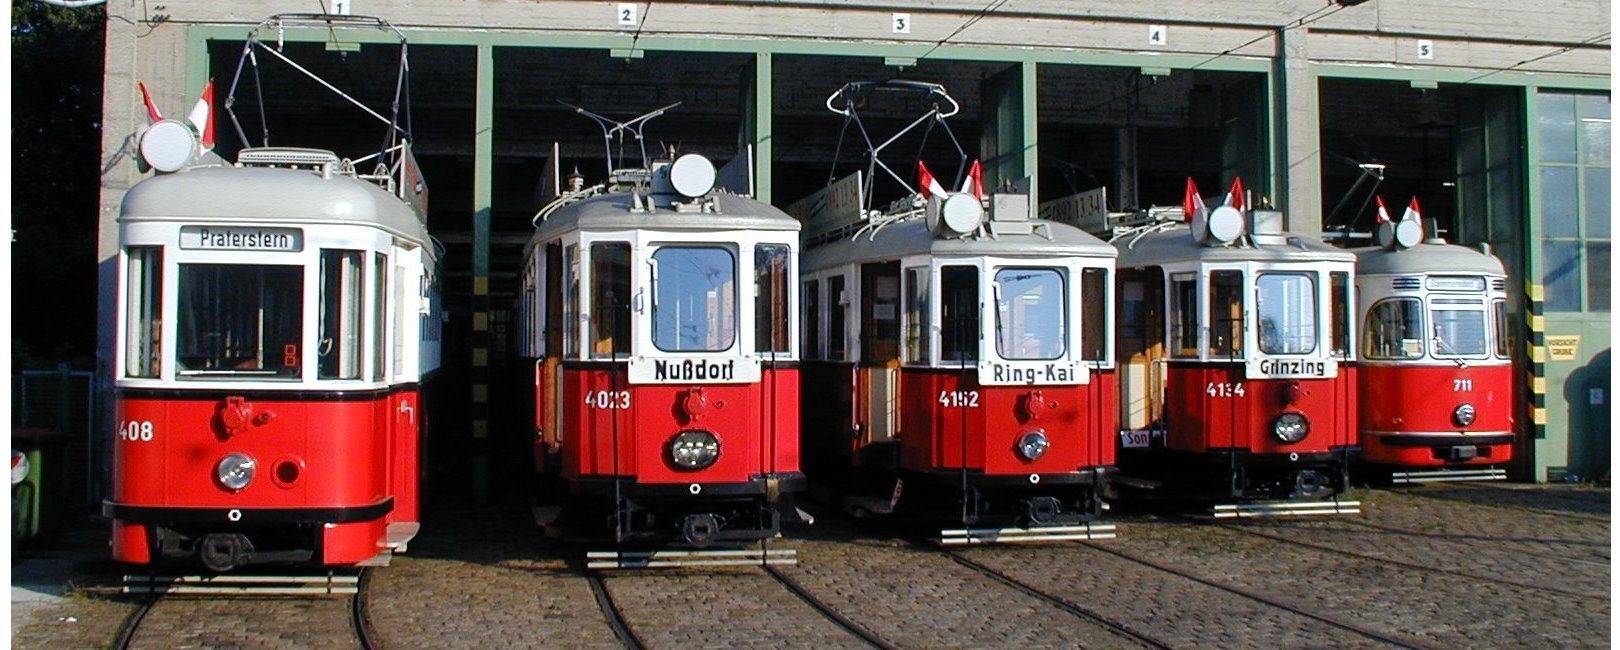 The Vintage Tramcars by Rent a Bim